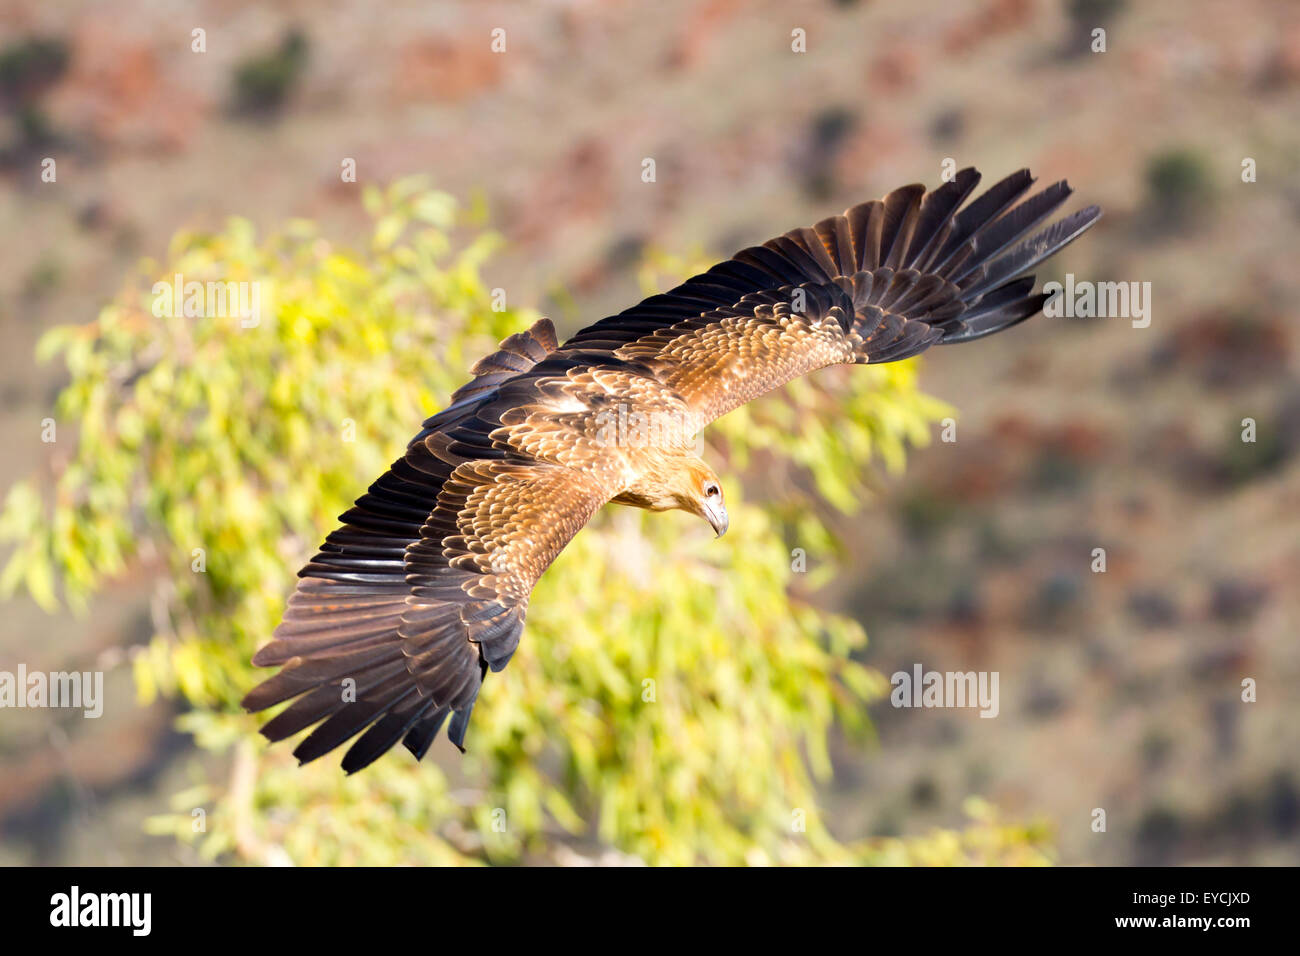 A native wedge tailed eagle in flight near Alice Springs, Northern Territory, Australia Stock Photo